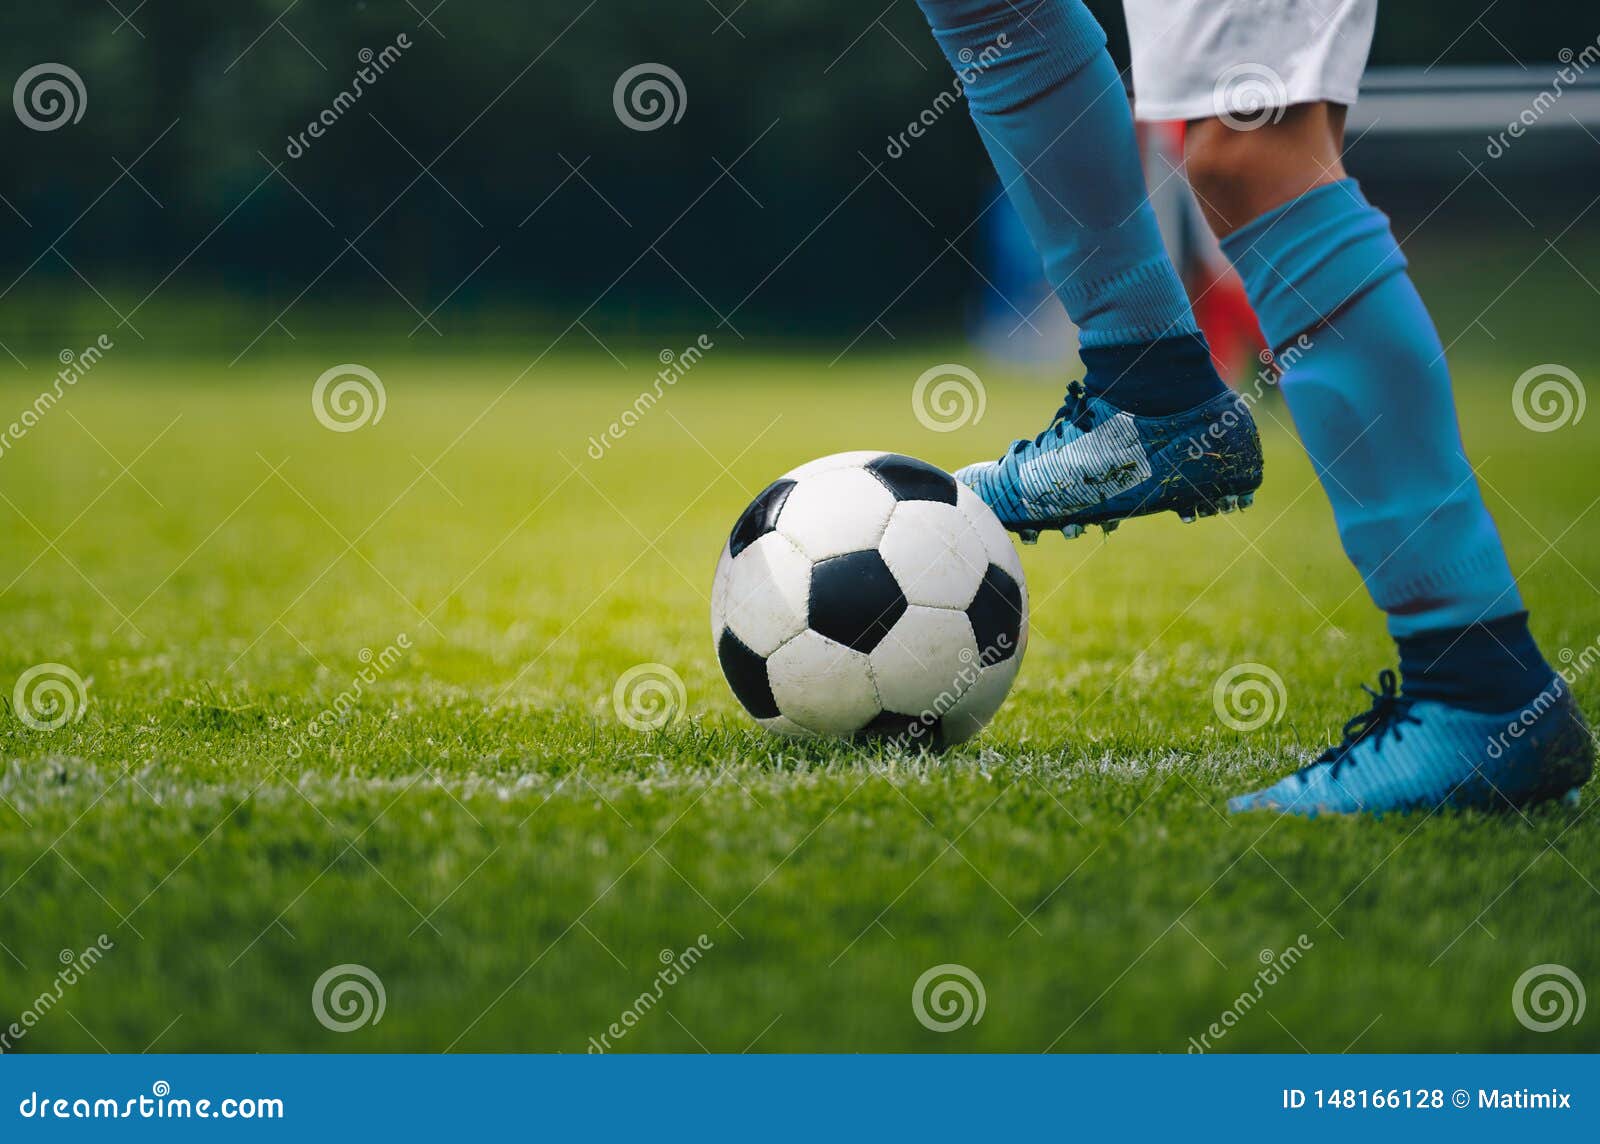 Close Up Of Legs And Feet Of Football Player In Blue Socks And Shoes Running And Dribbling With The Ball Stock Photo Image Of Club Improve